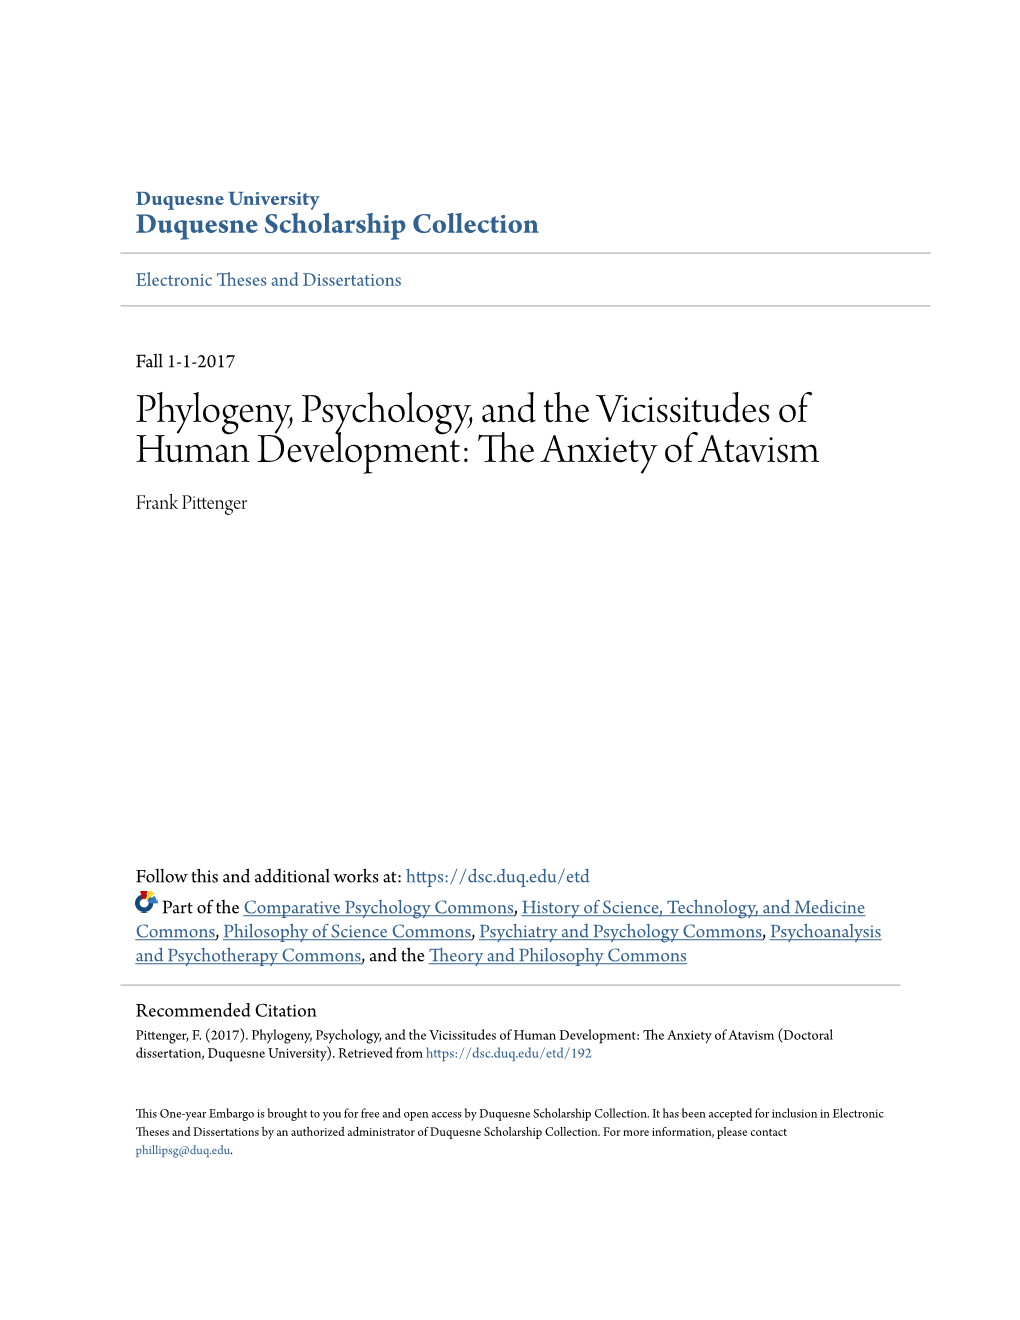 Phylogeny, Psychology, and the Vicissitudes of Human Development: the Anxiety of Atavism Frank Pittenger